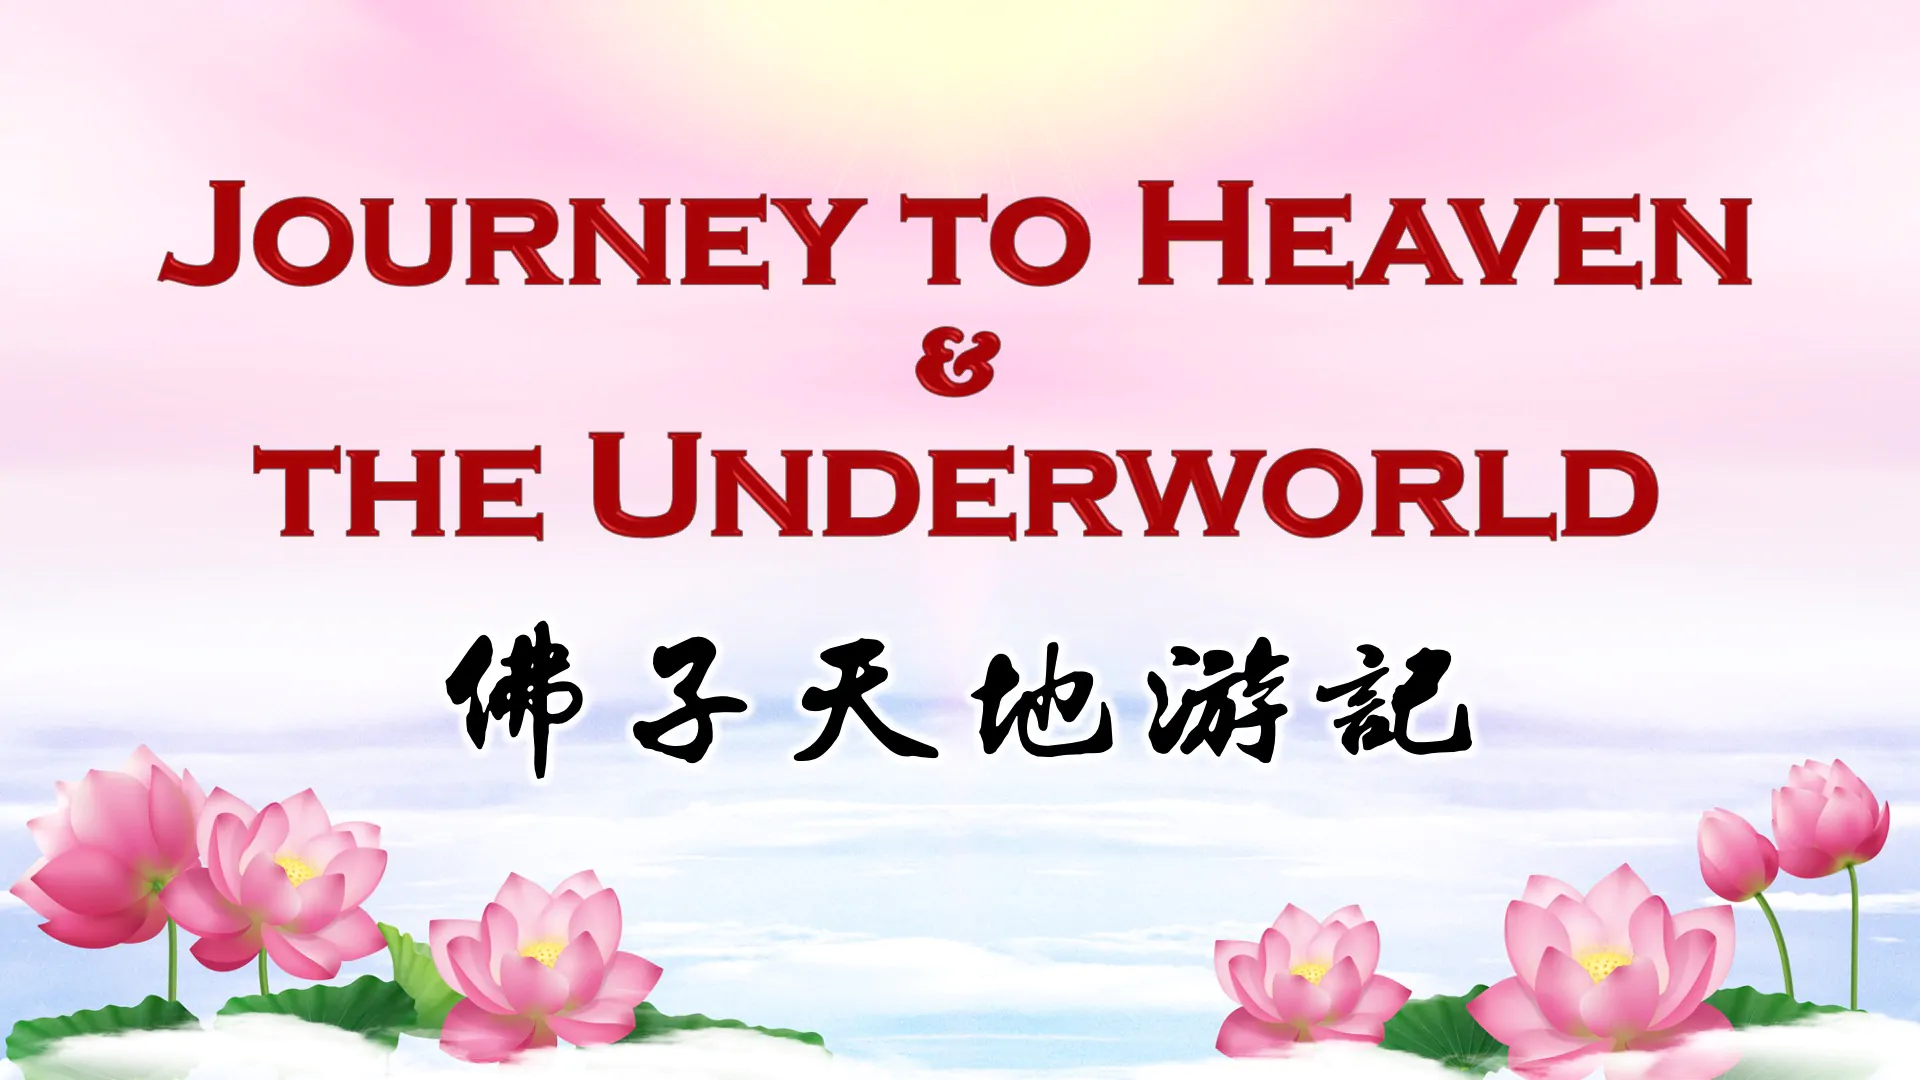 Journey to Heaven and the Underworld